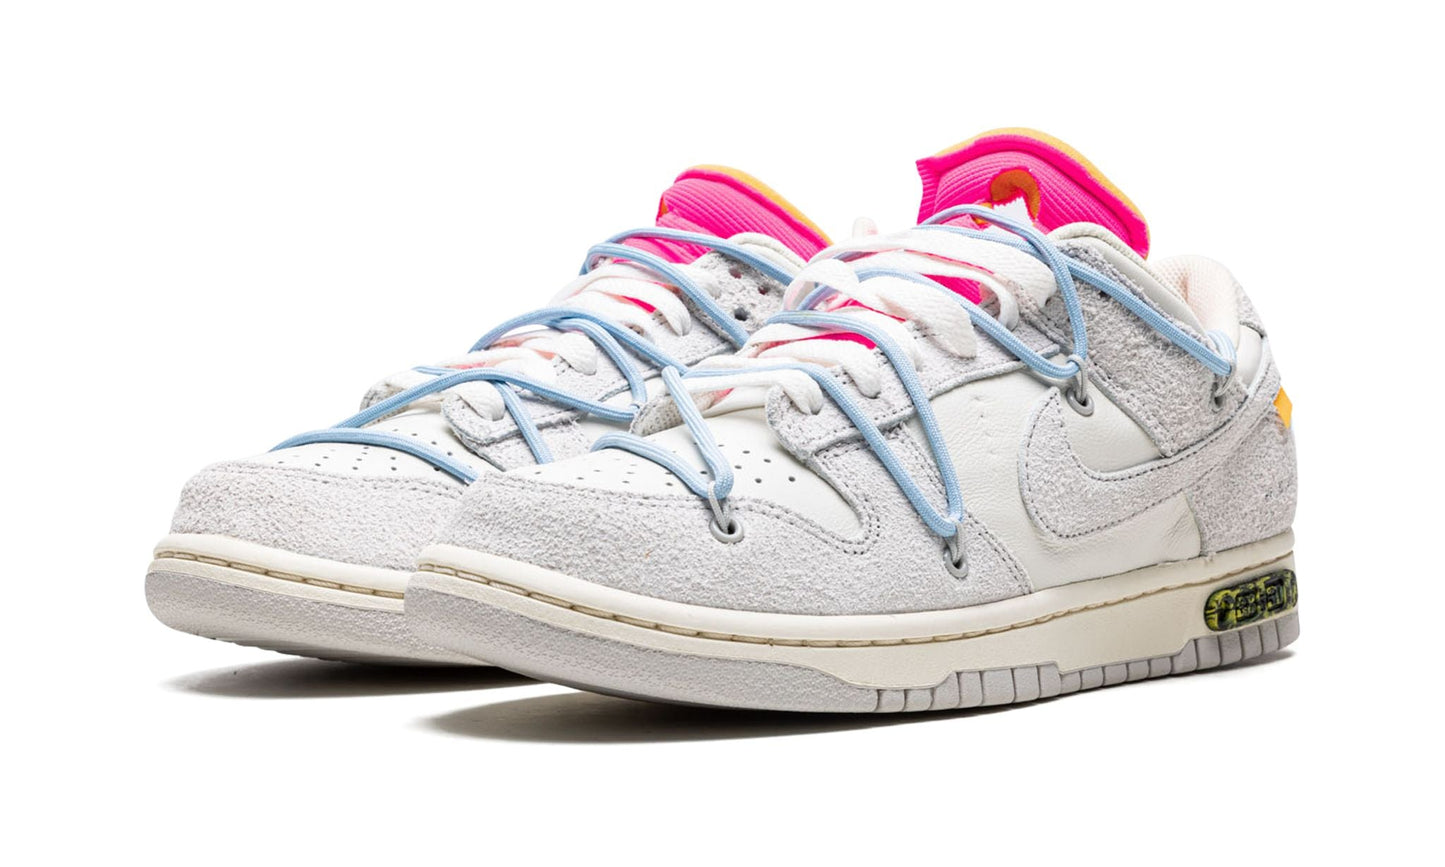 NIKE X OFF-WHITE DUNK LOW "Off-White - Lot 38"